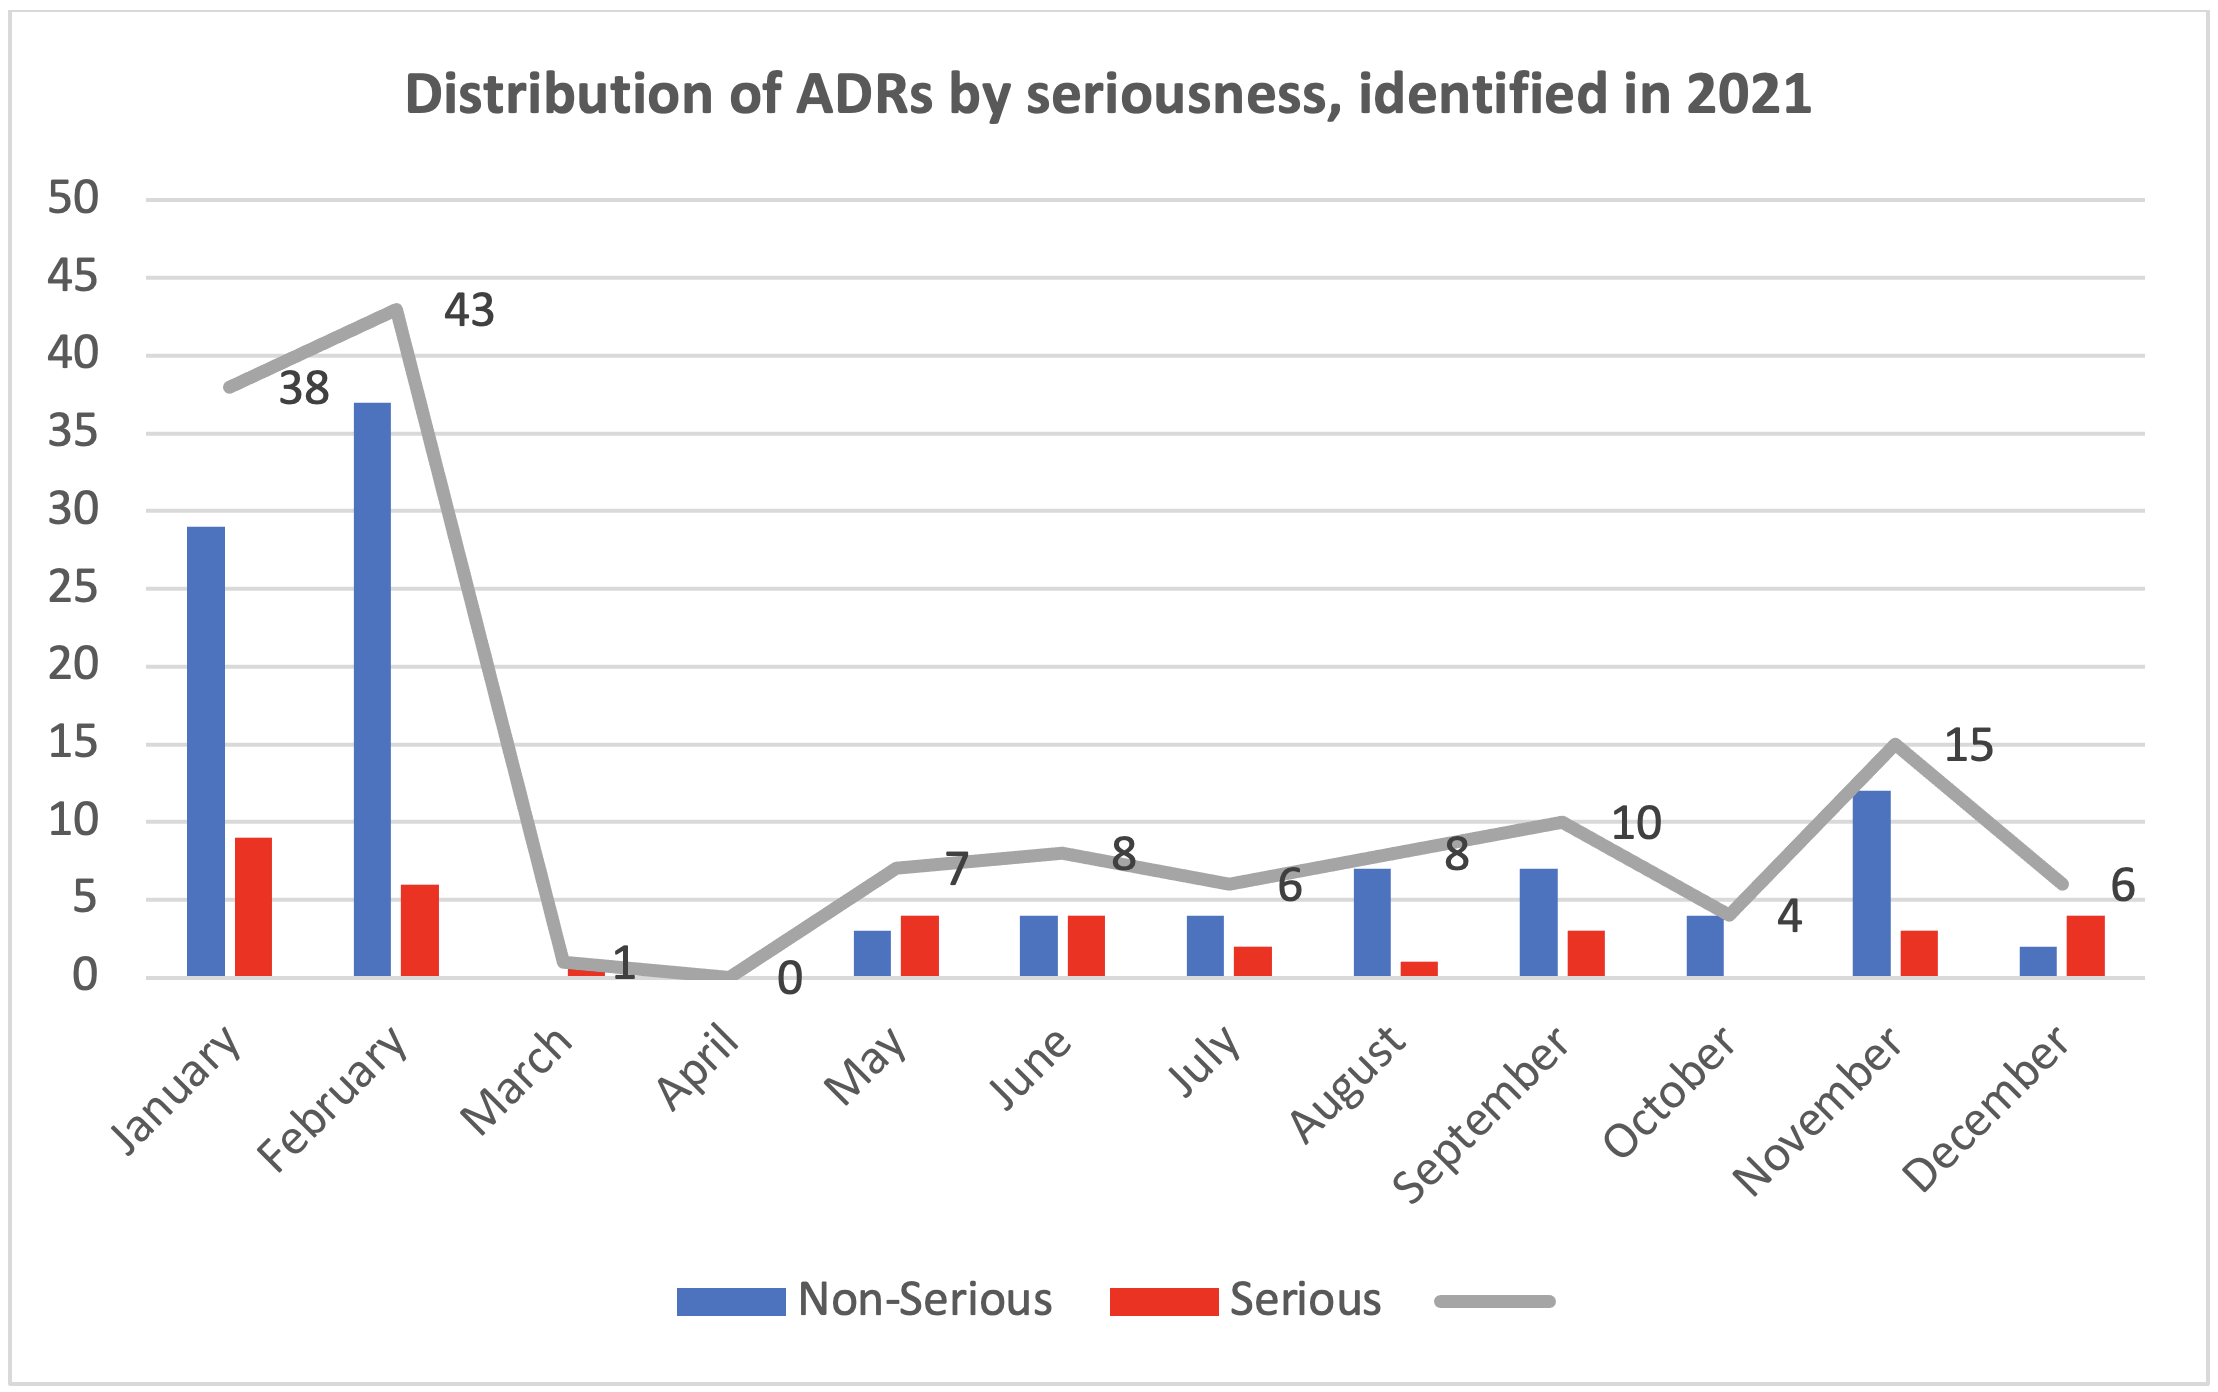 Distribution of ADRs in 2021